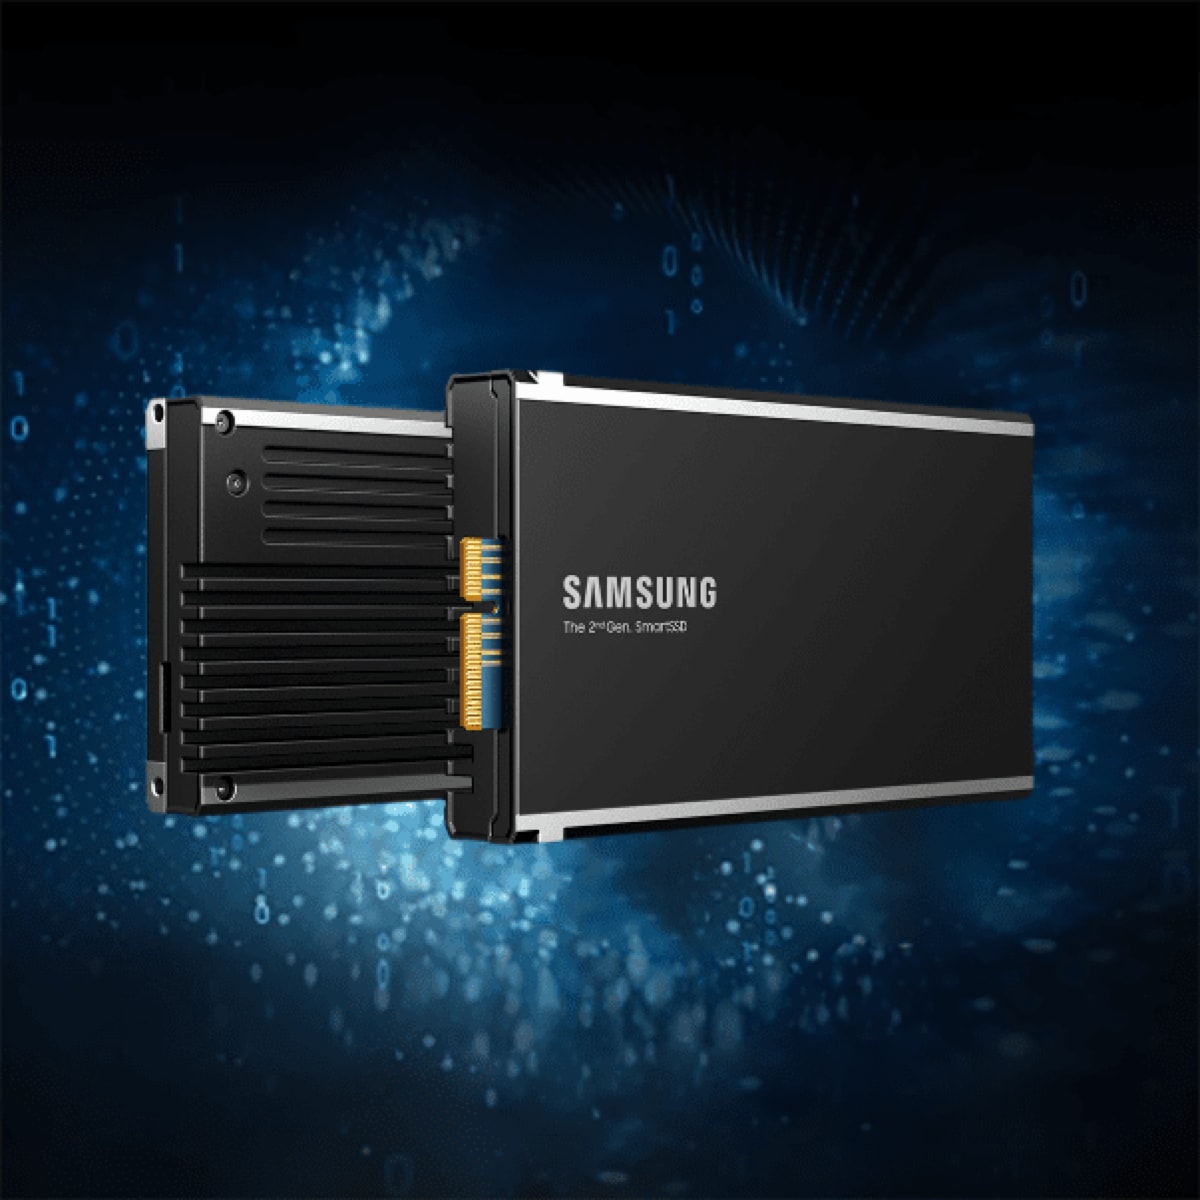 This is the 2nd generation SmartSSD, one of the Samsung Semiconductor products introduced at Memcon 2023.